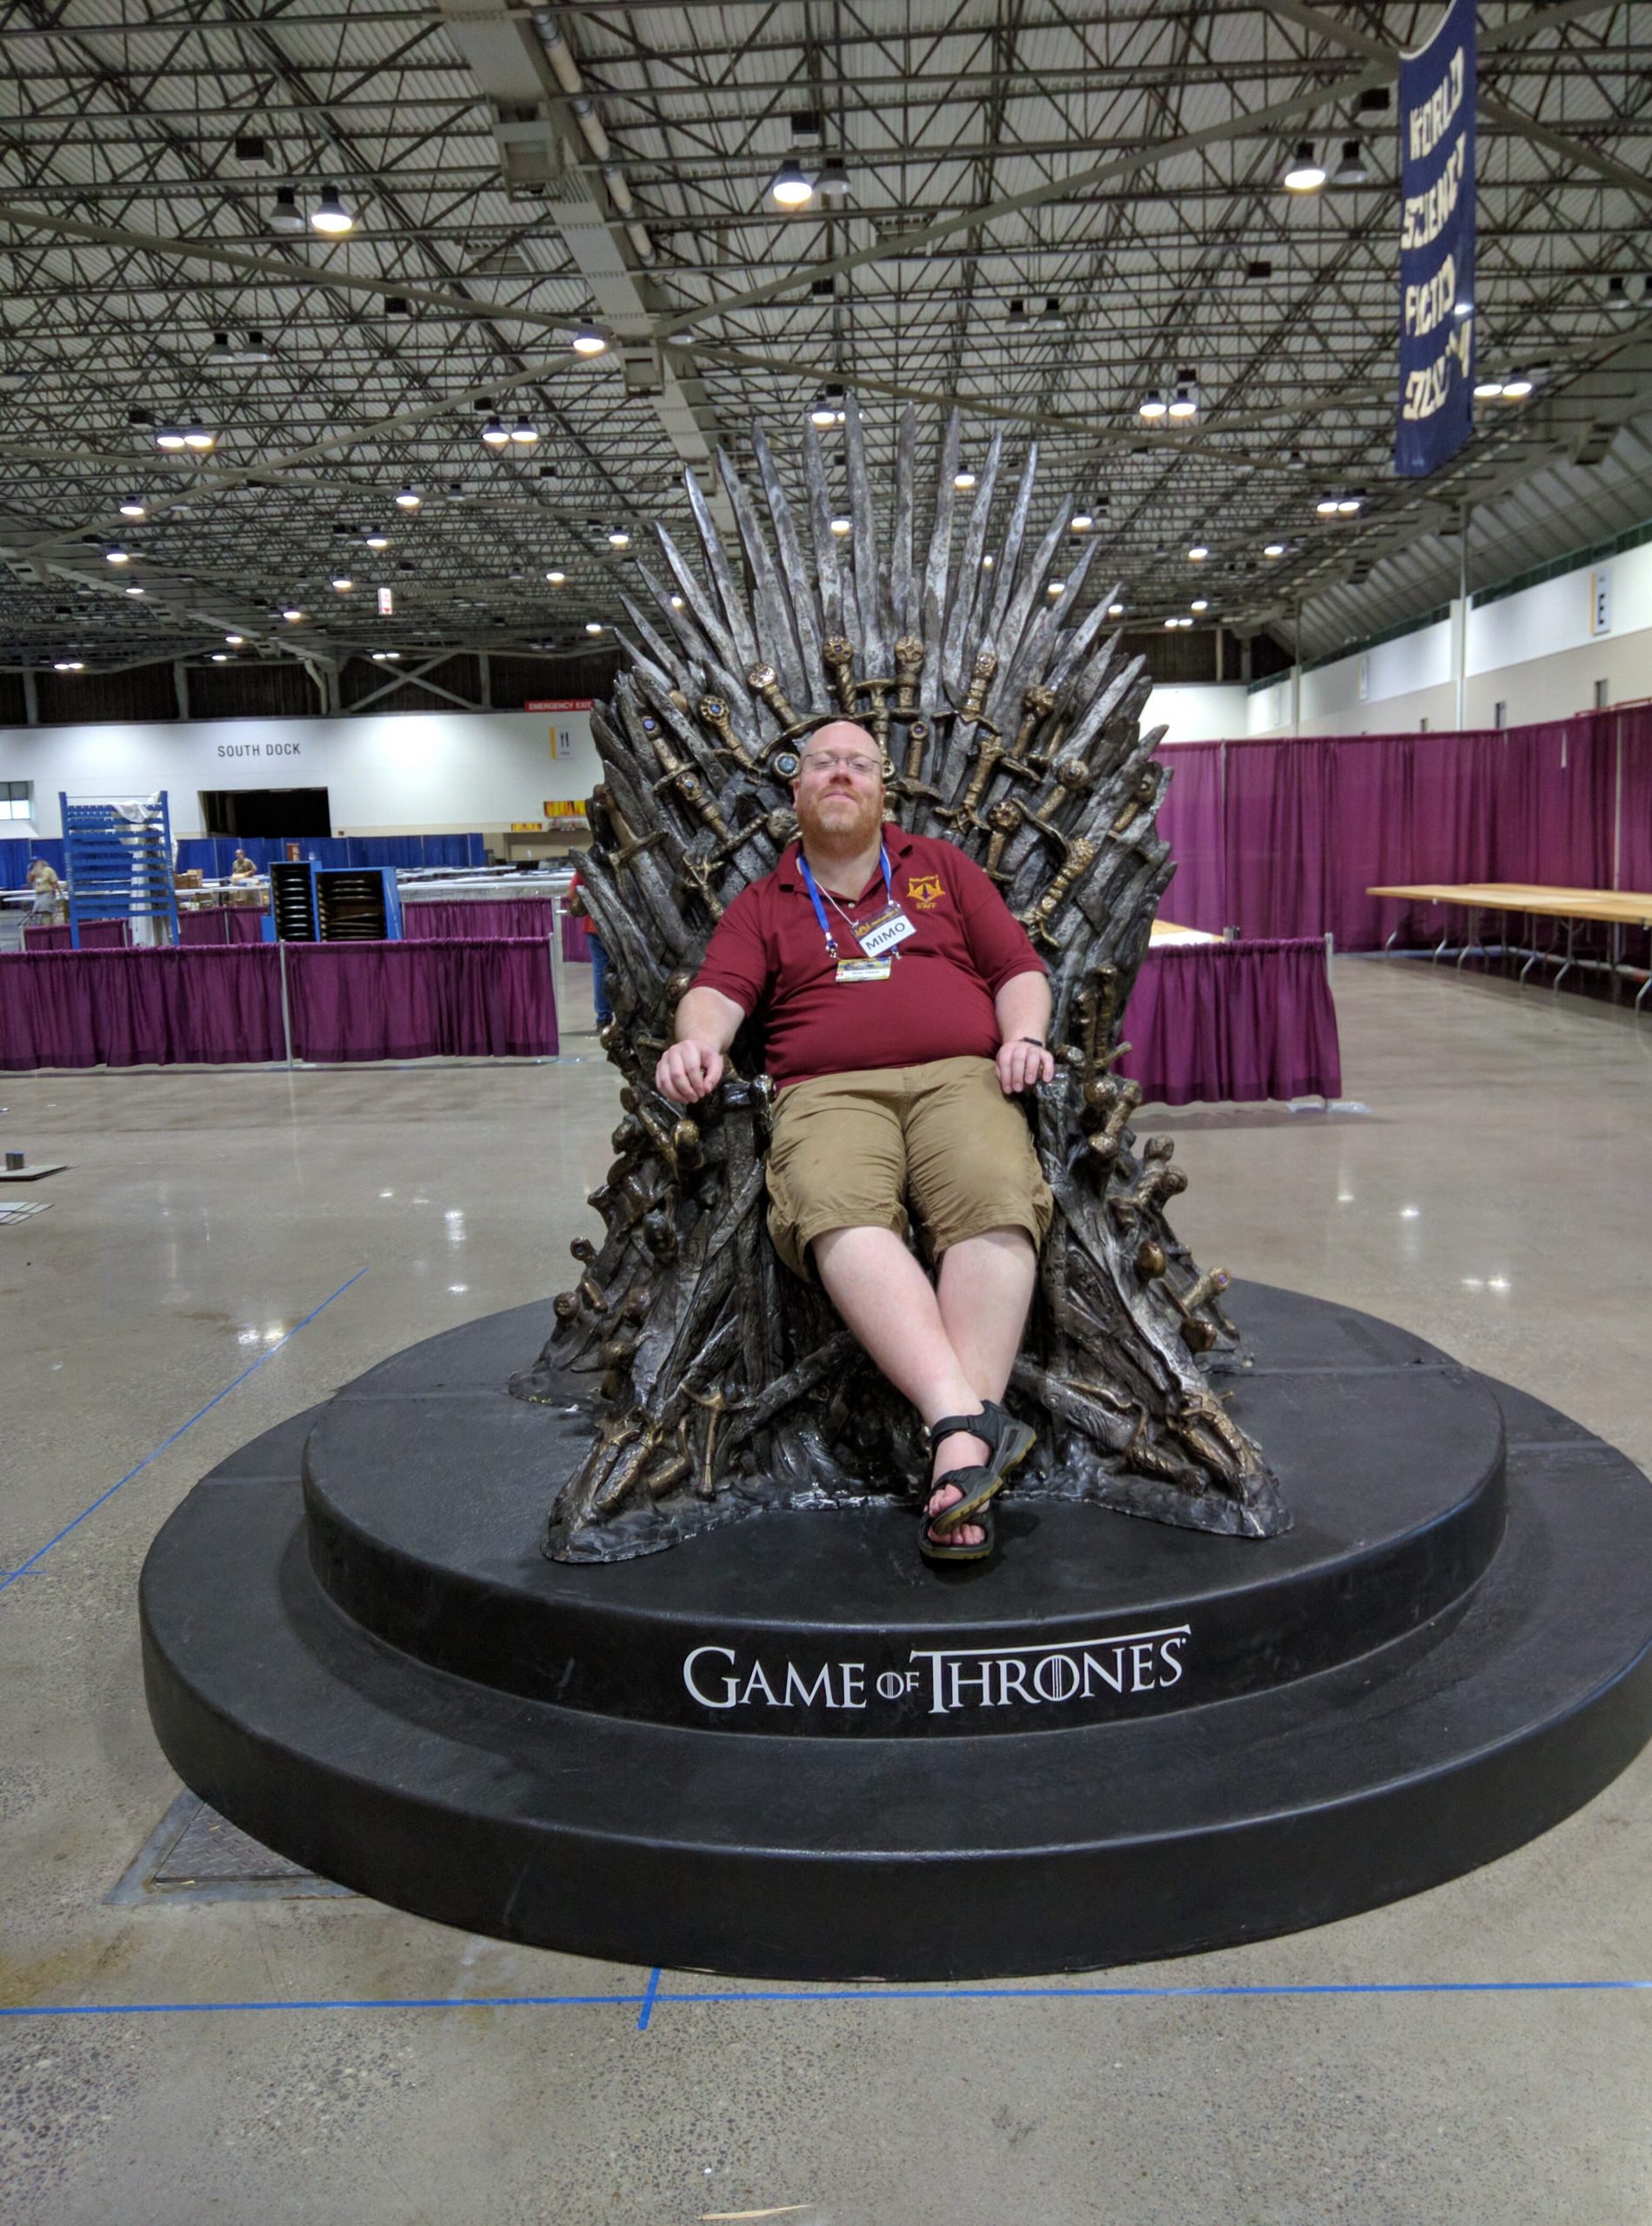 Brian Nisbet sitting in a replica of the iron throne from the TV show Game of Thrones, with a large convention venue in the background